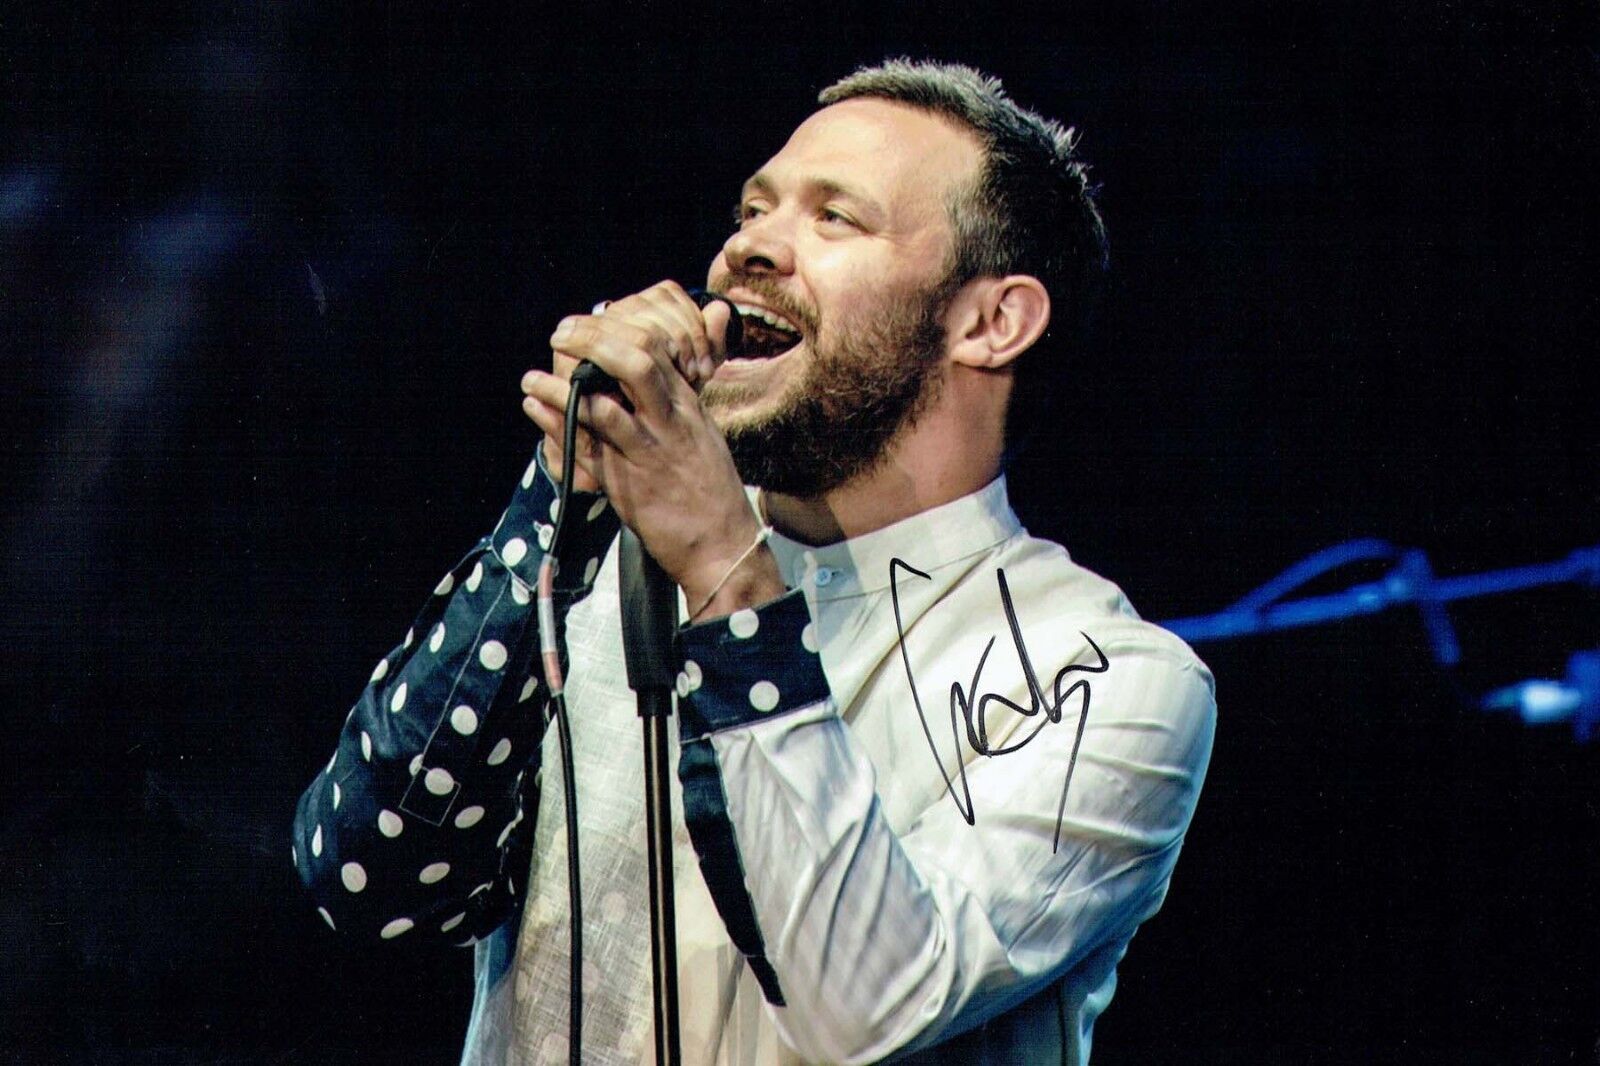 Will YOUNG Signed Autograph 12x8 Photo Poster painting A AFTAL COA Pop Idol WINNER Singer